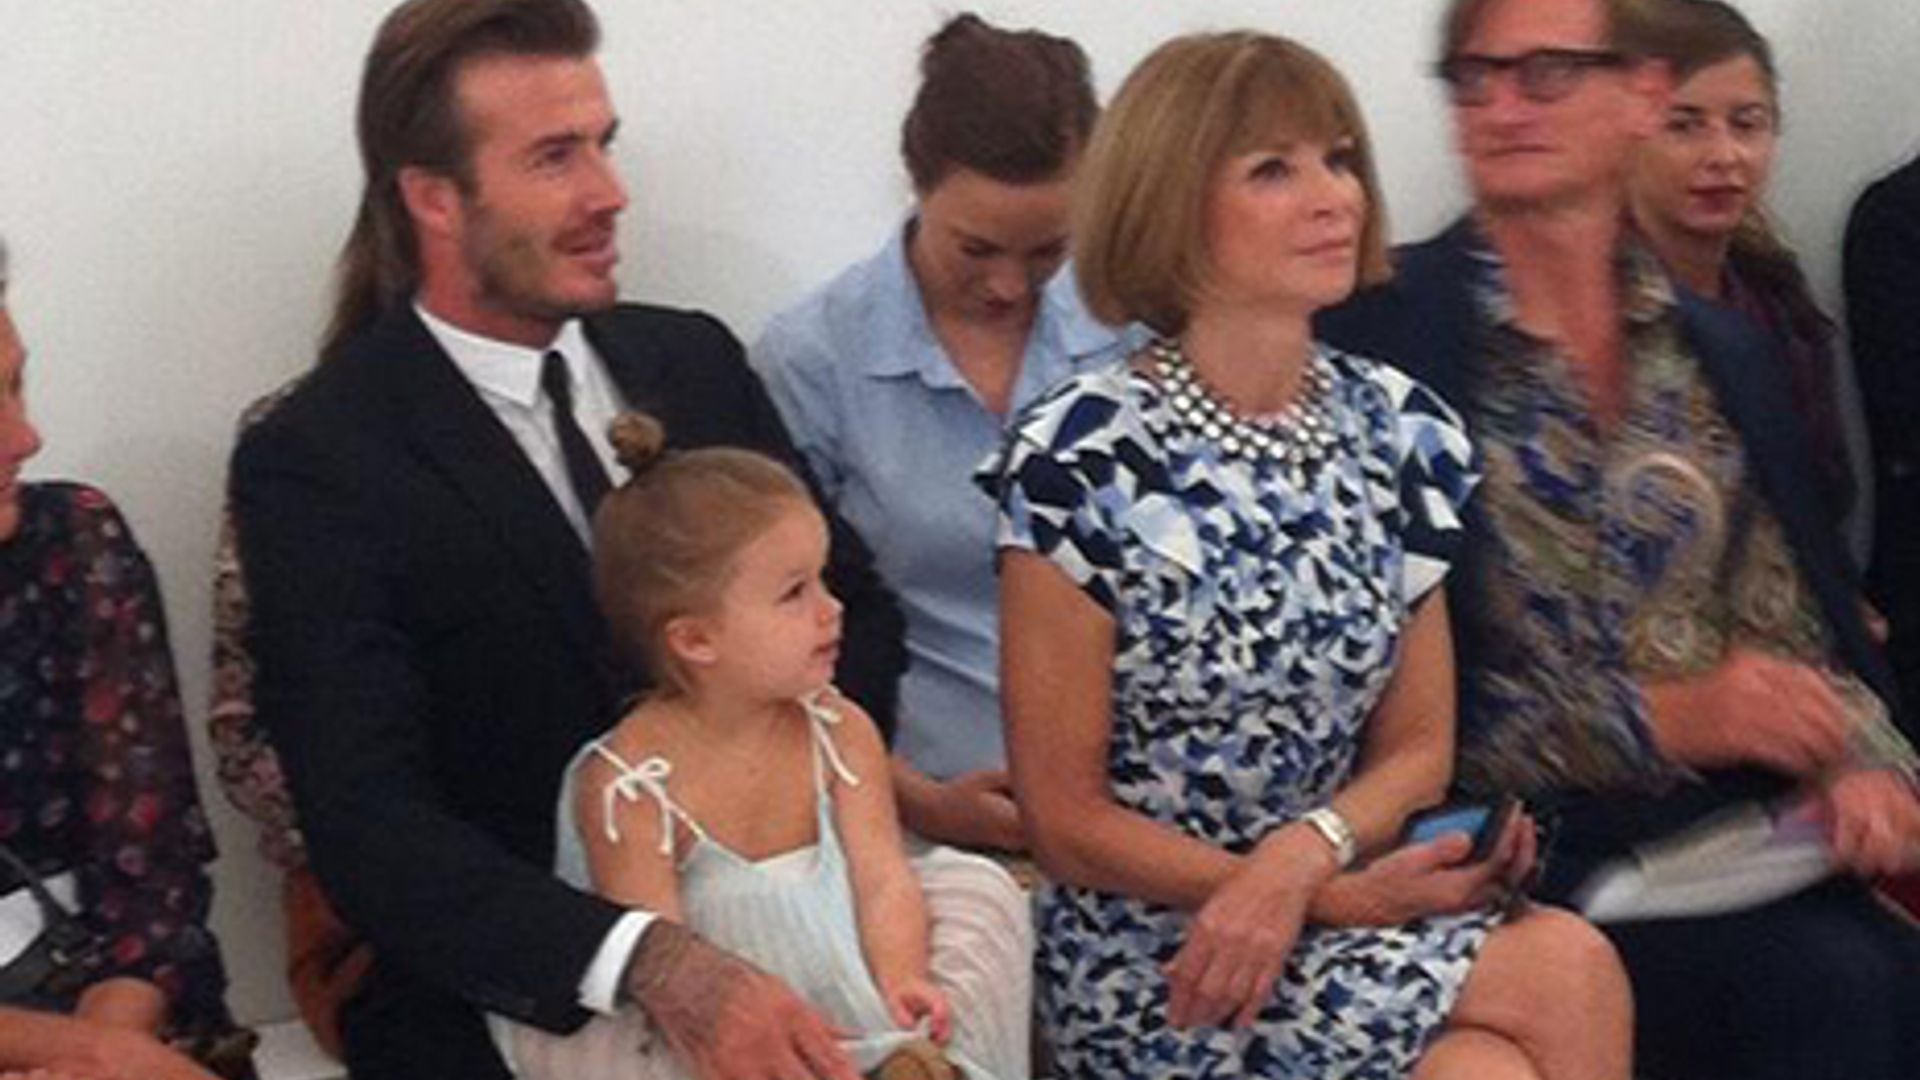 Adorable Harper Beckham sits front row at mother Victoria Beckham's fashion show